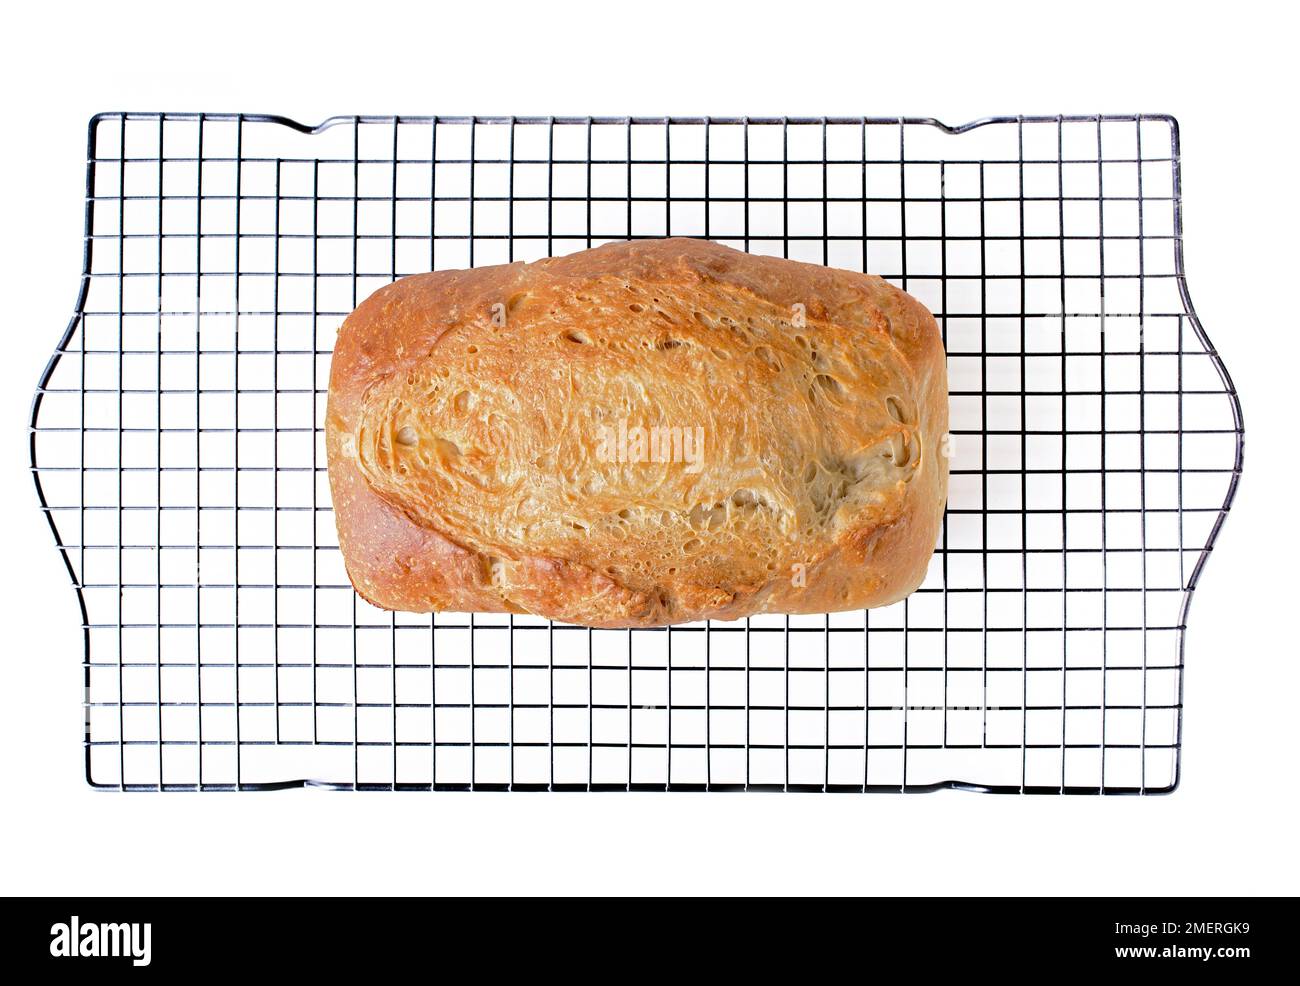 A loaf of homemade white bread on a wire cooling rack. Stock Photo